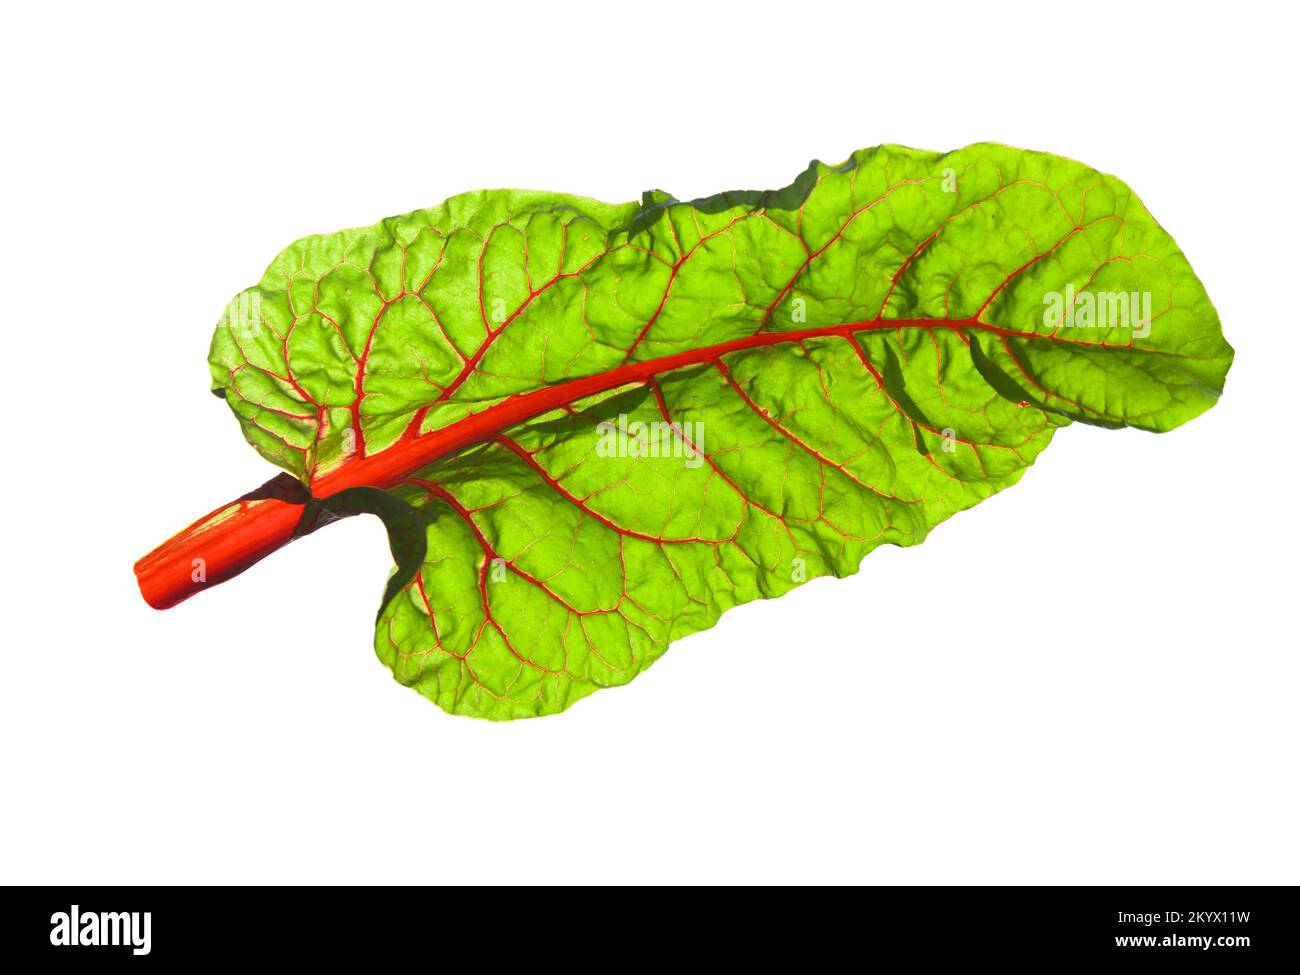 Beet leaves. Beetroot leaves, fresh beet leaf isolated on white background. Stock Photo